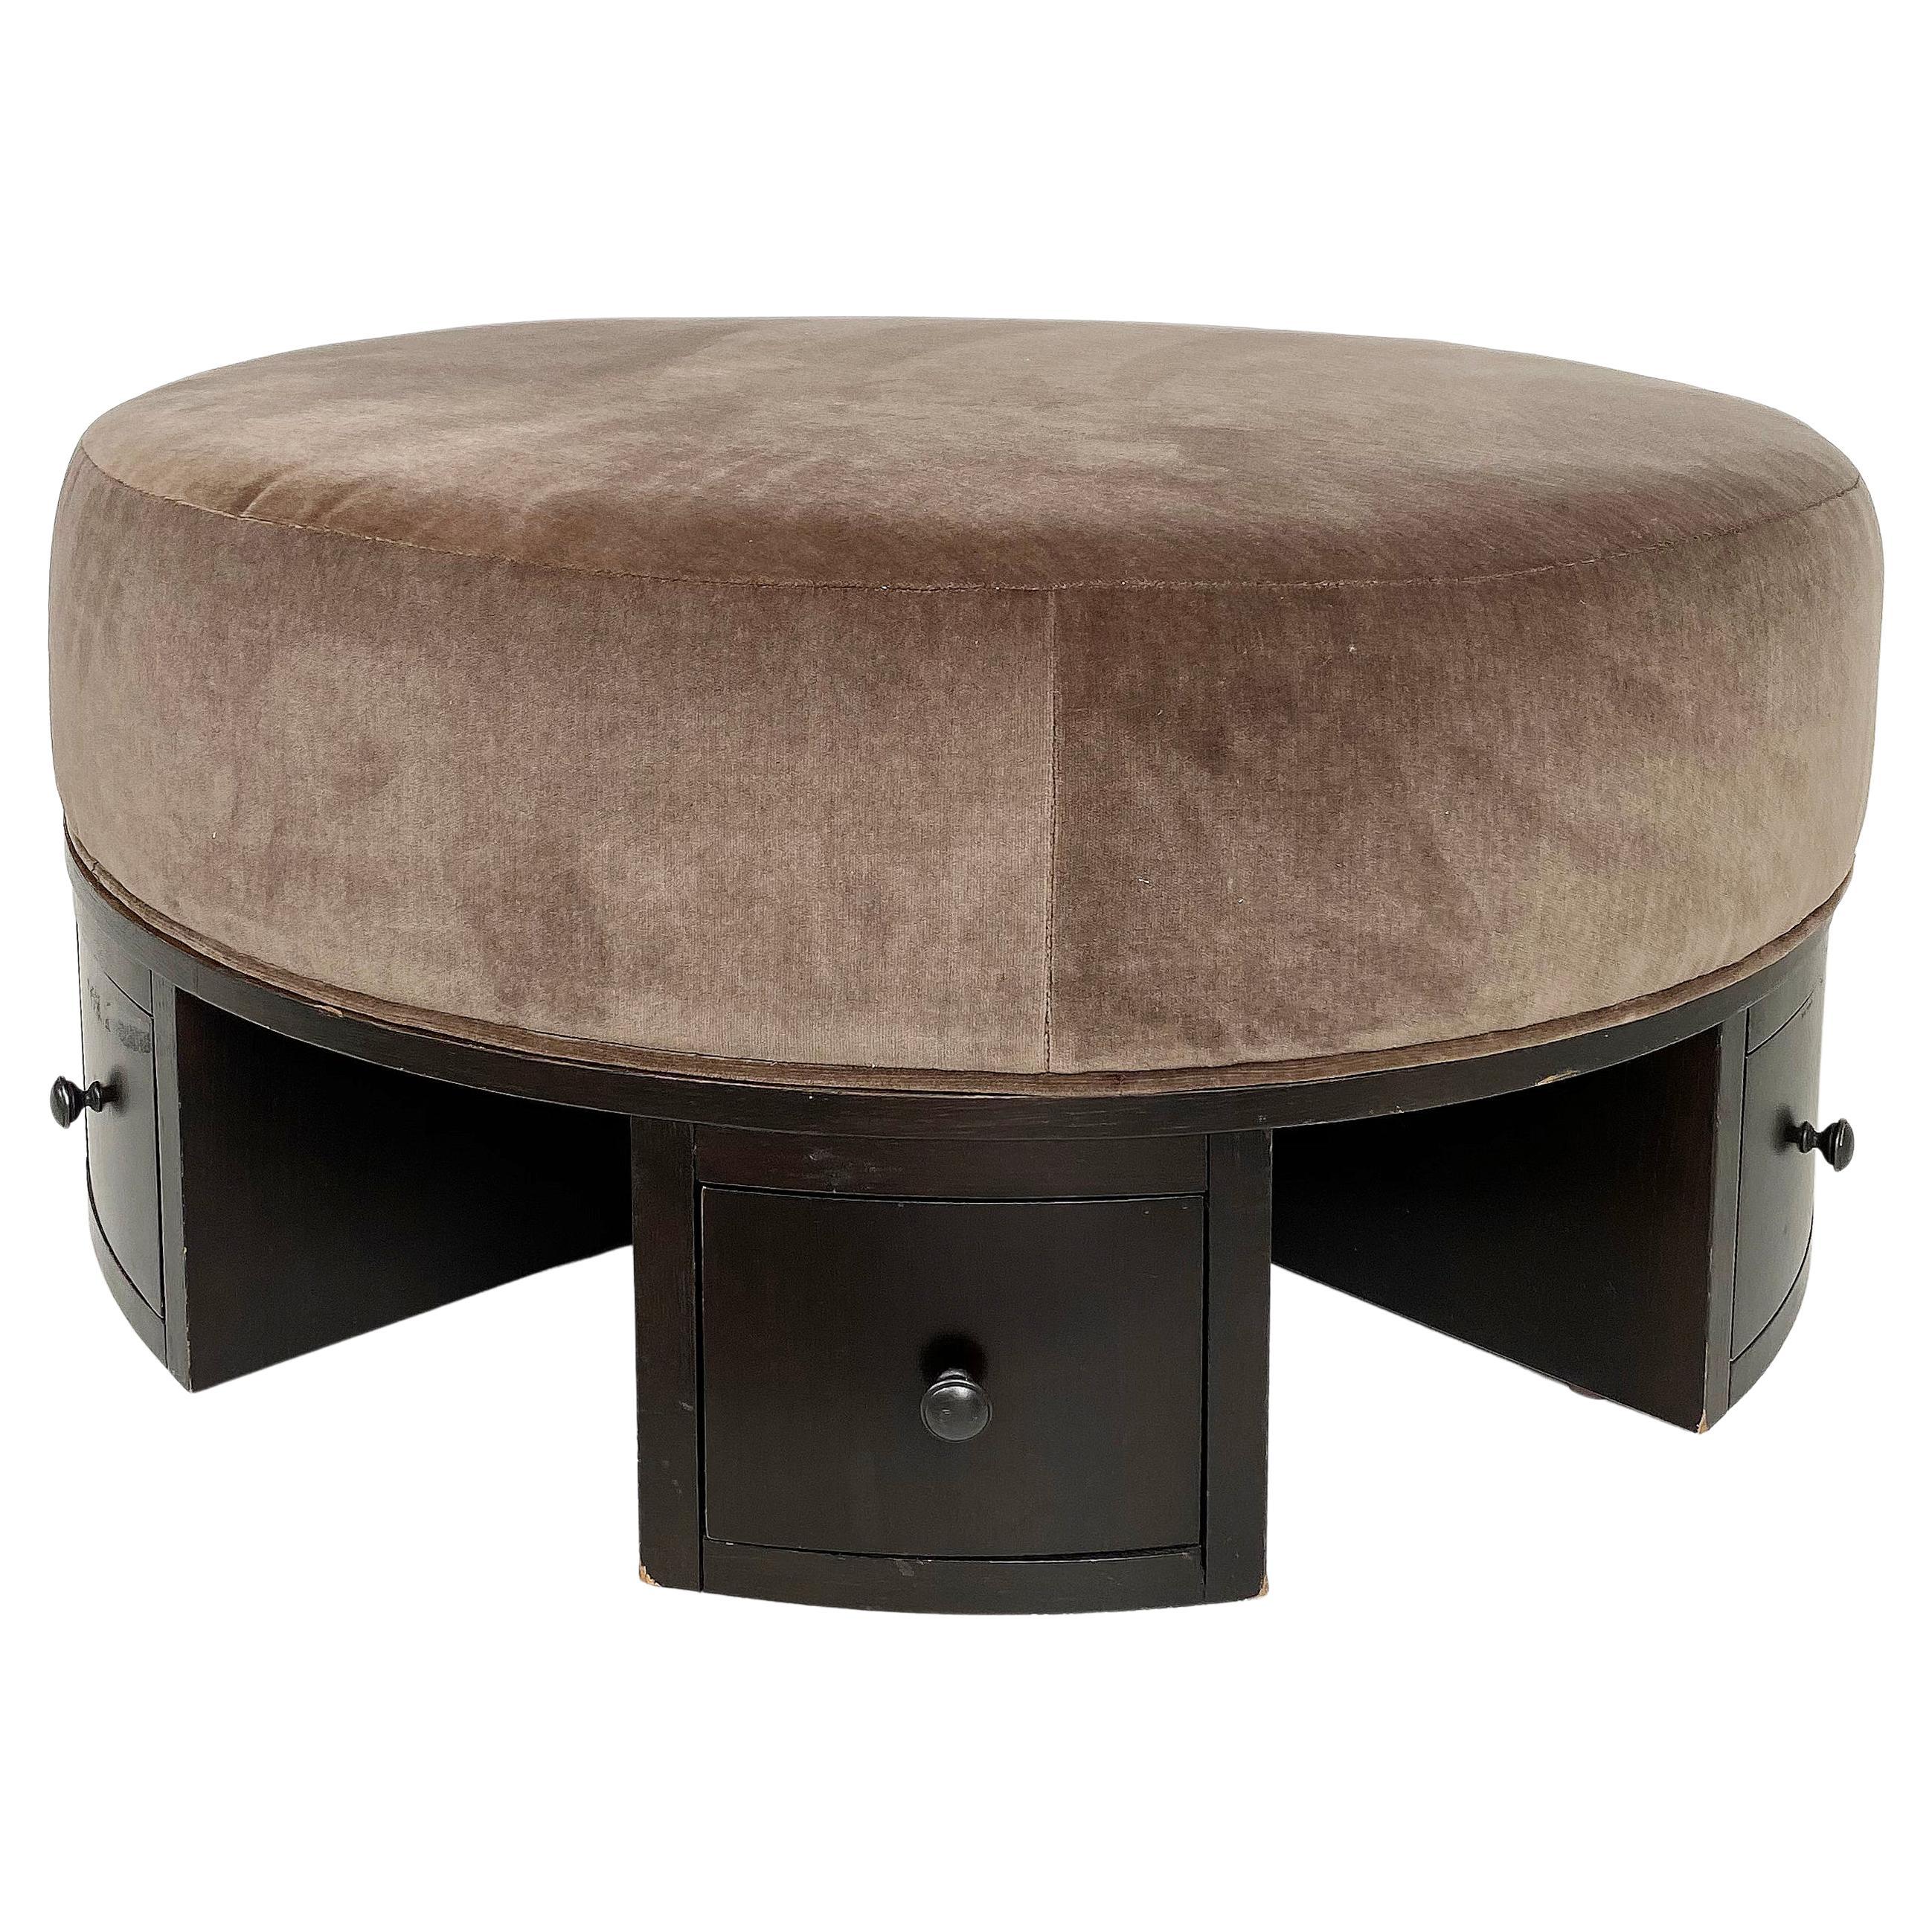 Large Ottoman Pouf with Drawers Base by Hotel Maison